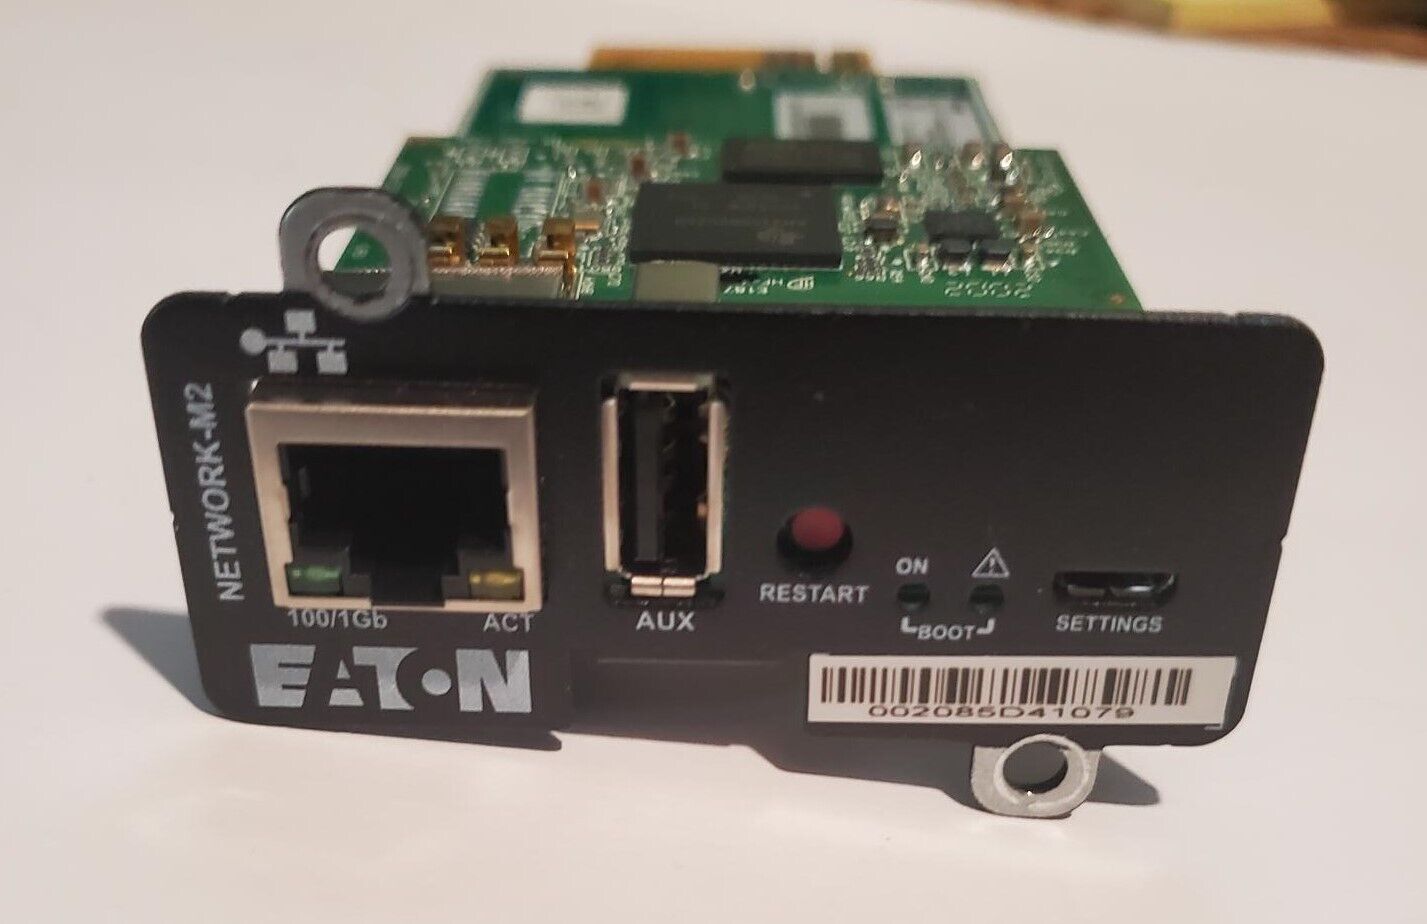 EATON NETWORK-M2 NETWORK CARD **CARD ONLY**